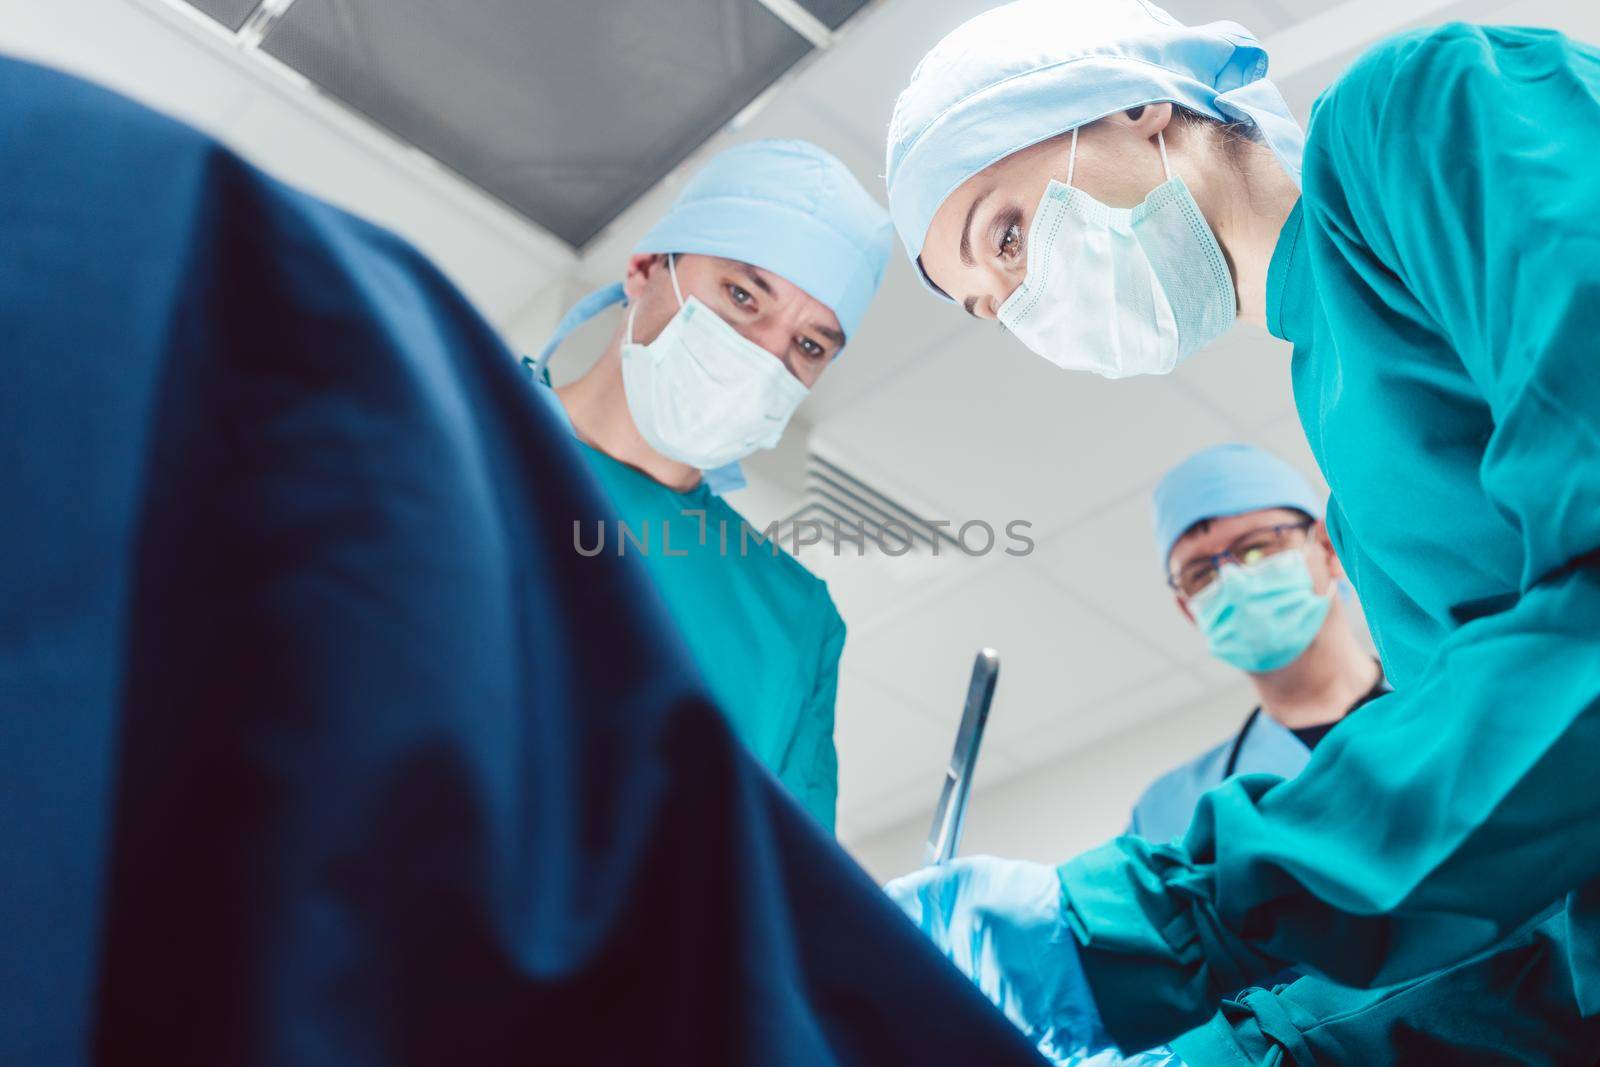 Team of surgeons in operation room during surgery from low angle view